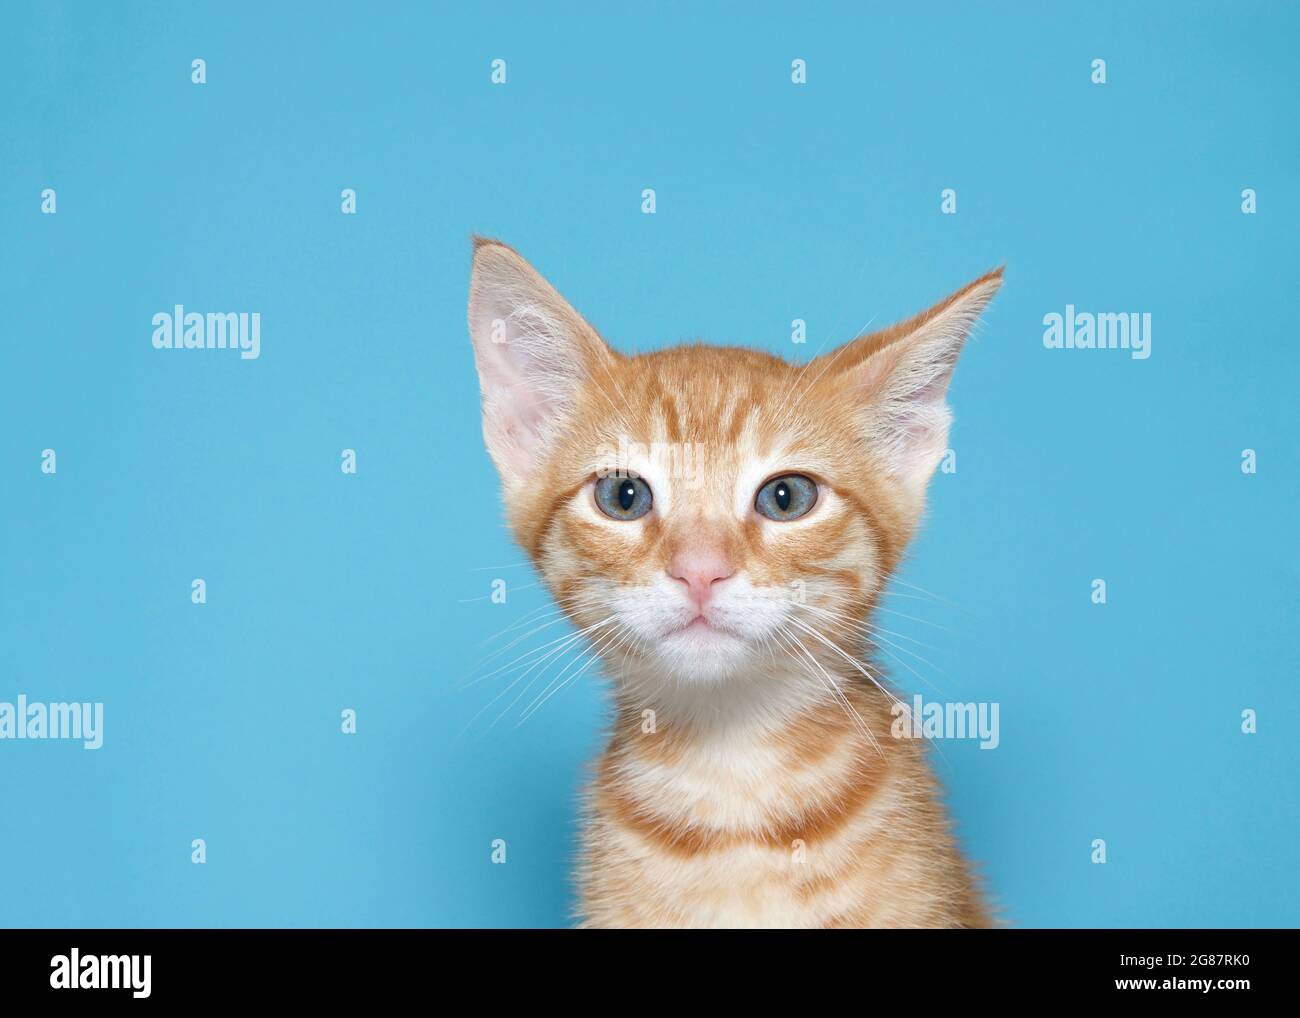 Portrait of an orange tabby kitten curiously looking at viewer, one ear tilted. Turquoise blue background with copy space. Stock Photo